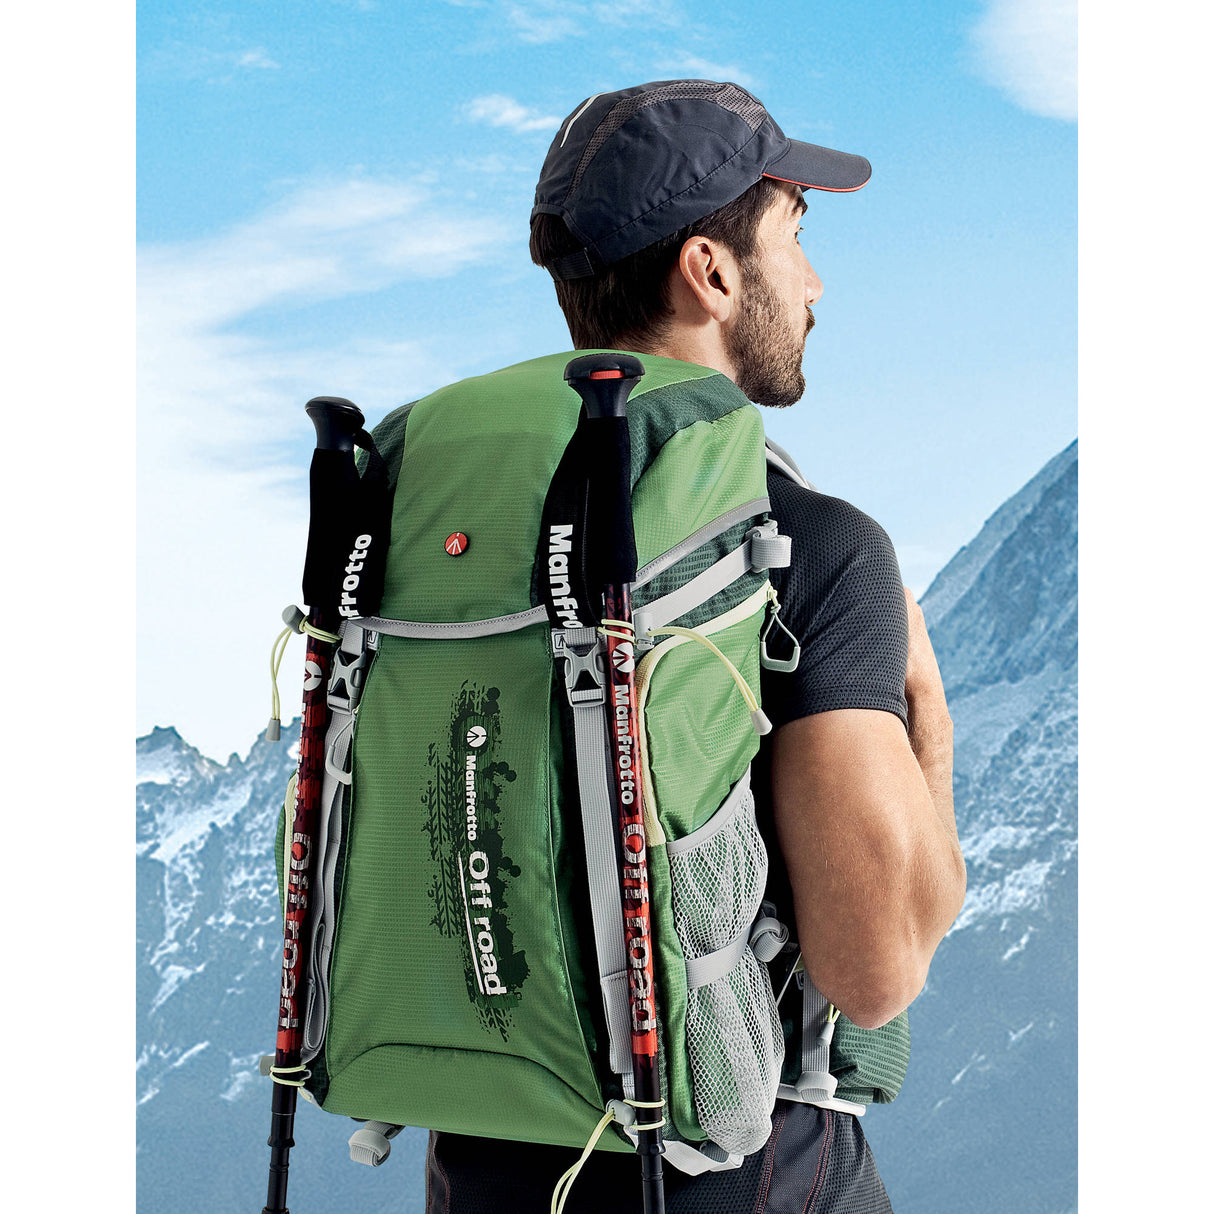 Manfrotto Off road Hiker Backpack (20L) Green